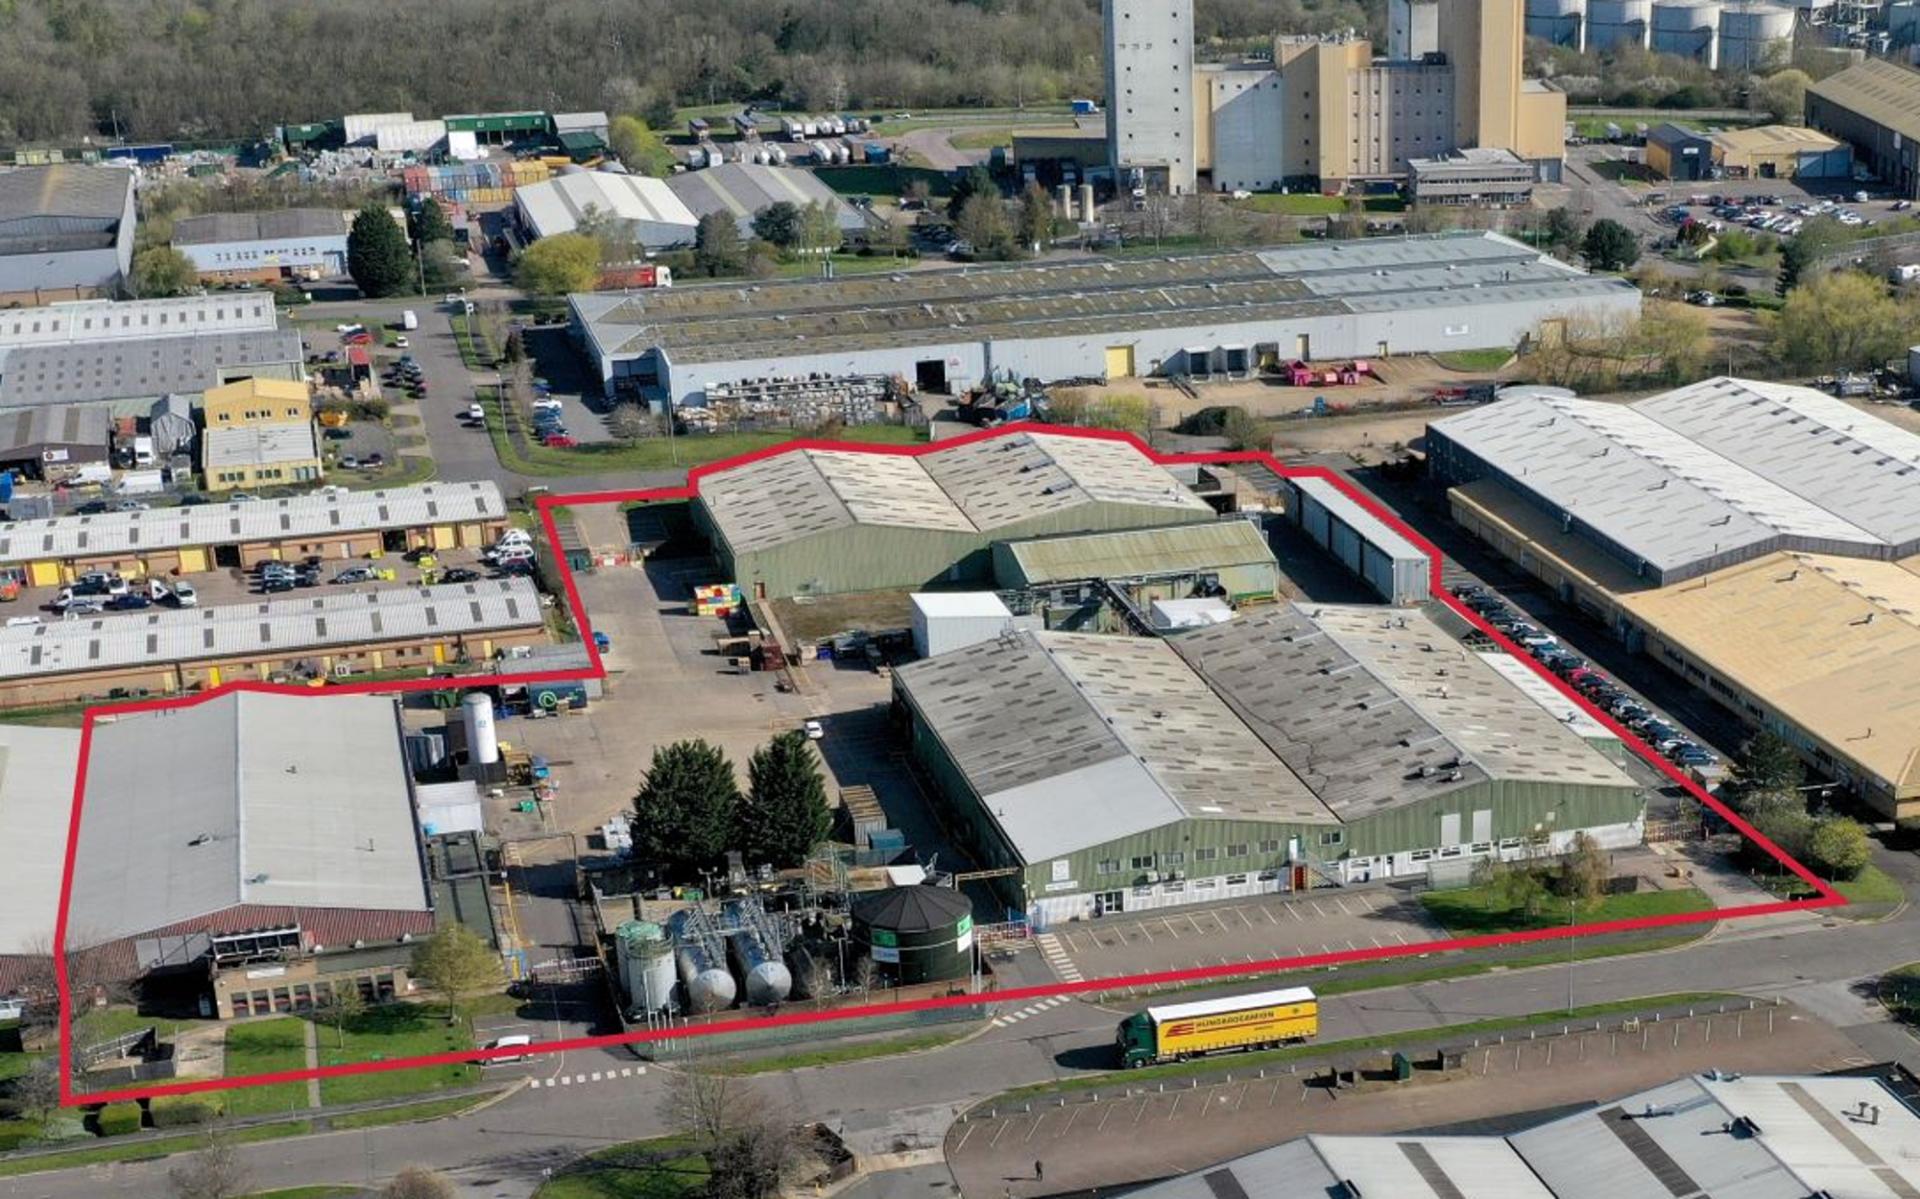 94k sq ft food production site on the market for £4.95m